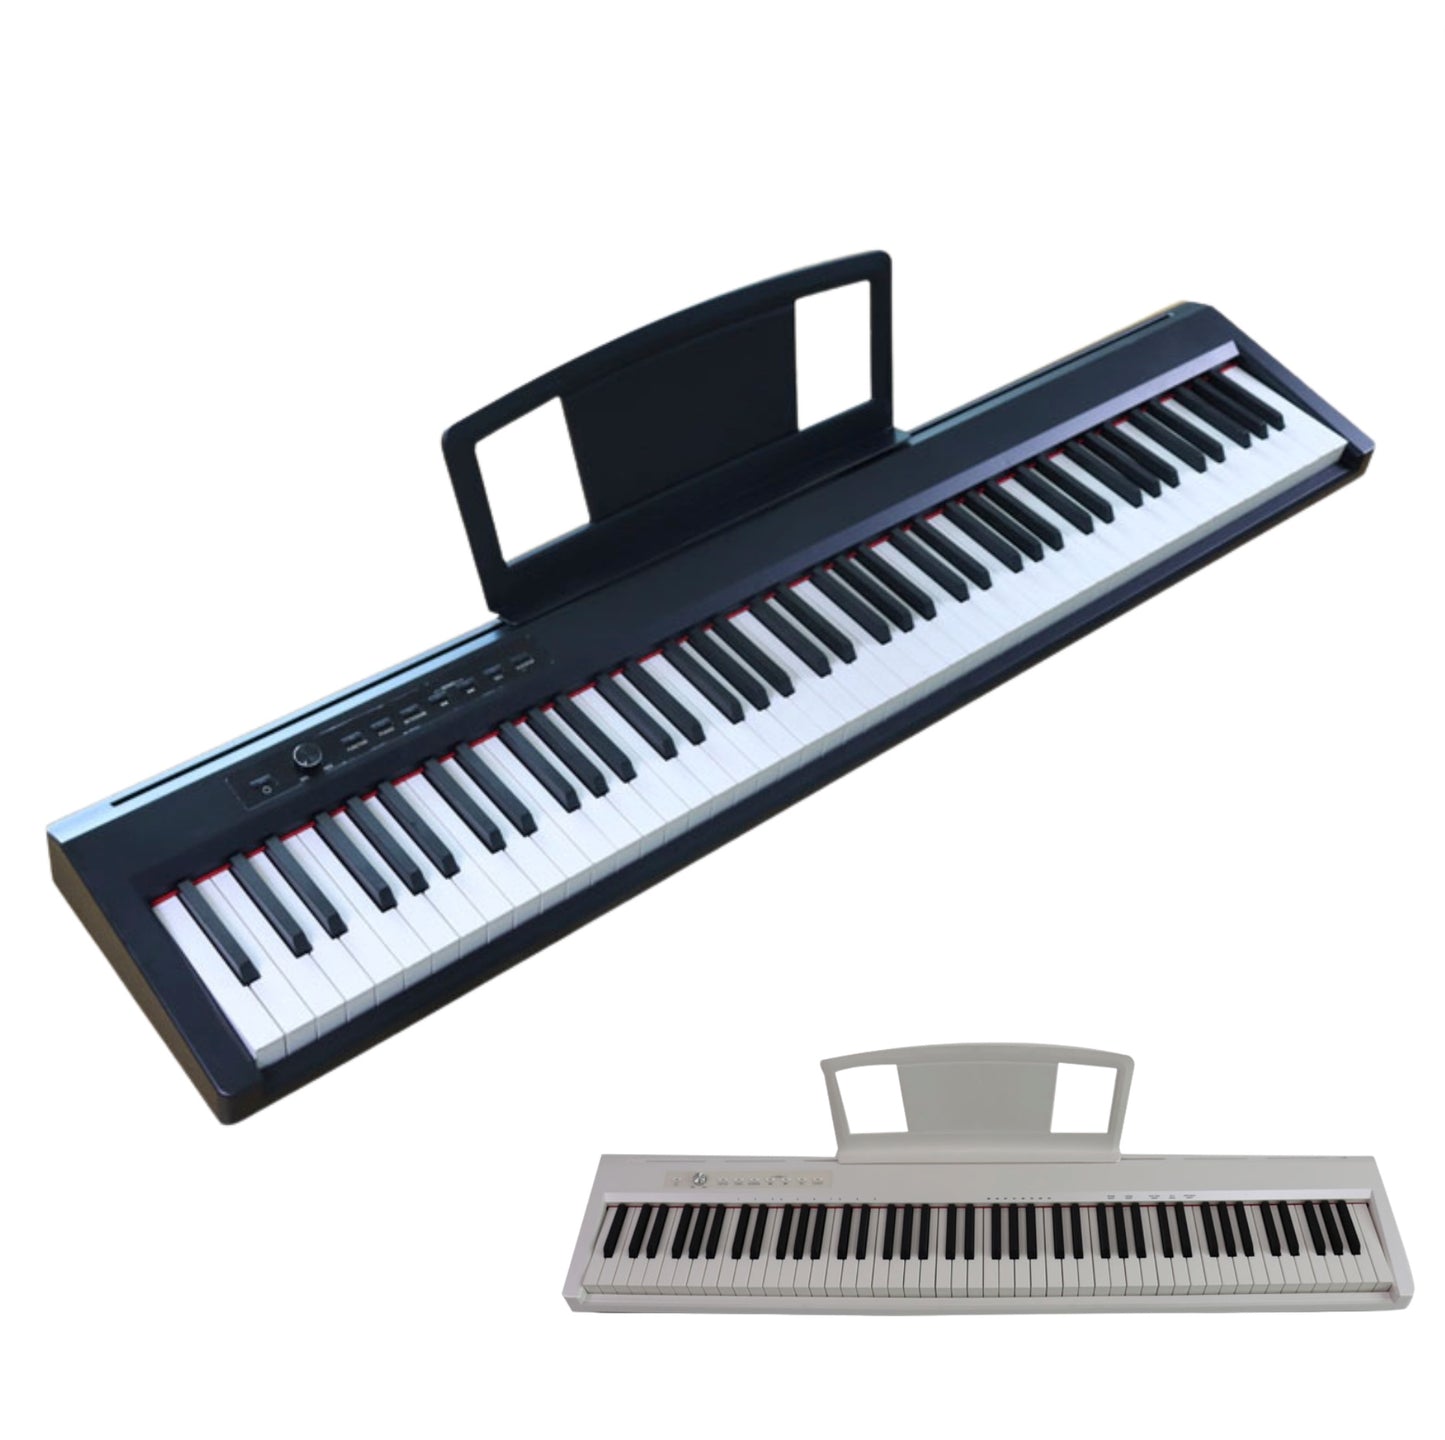 Finechord 88 Keys Touch Response Piano Keyboard FP-45 for the beginner